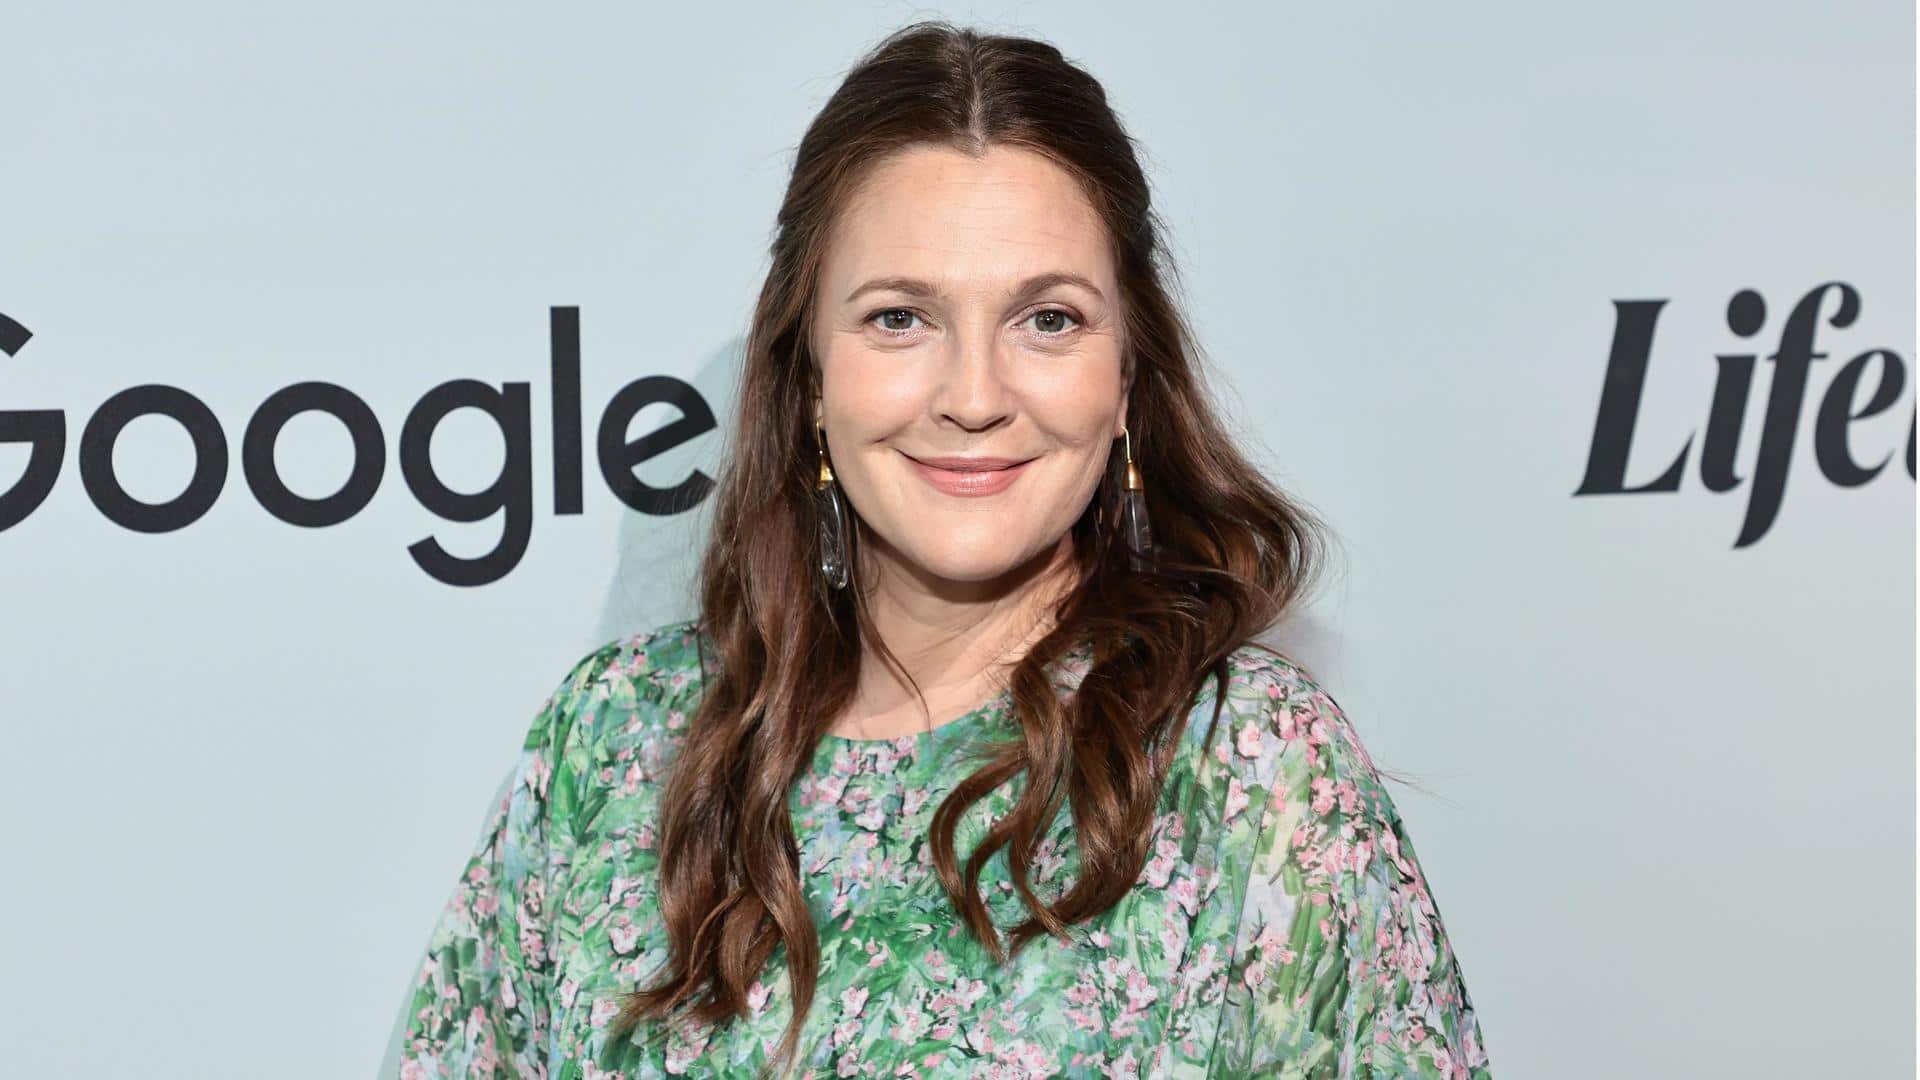 Drew Barrymore condemns tabloid's fabricated story about wishing mother's death